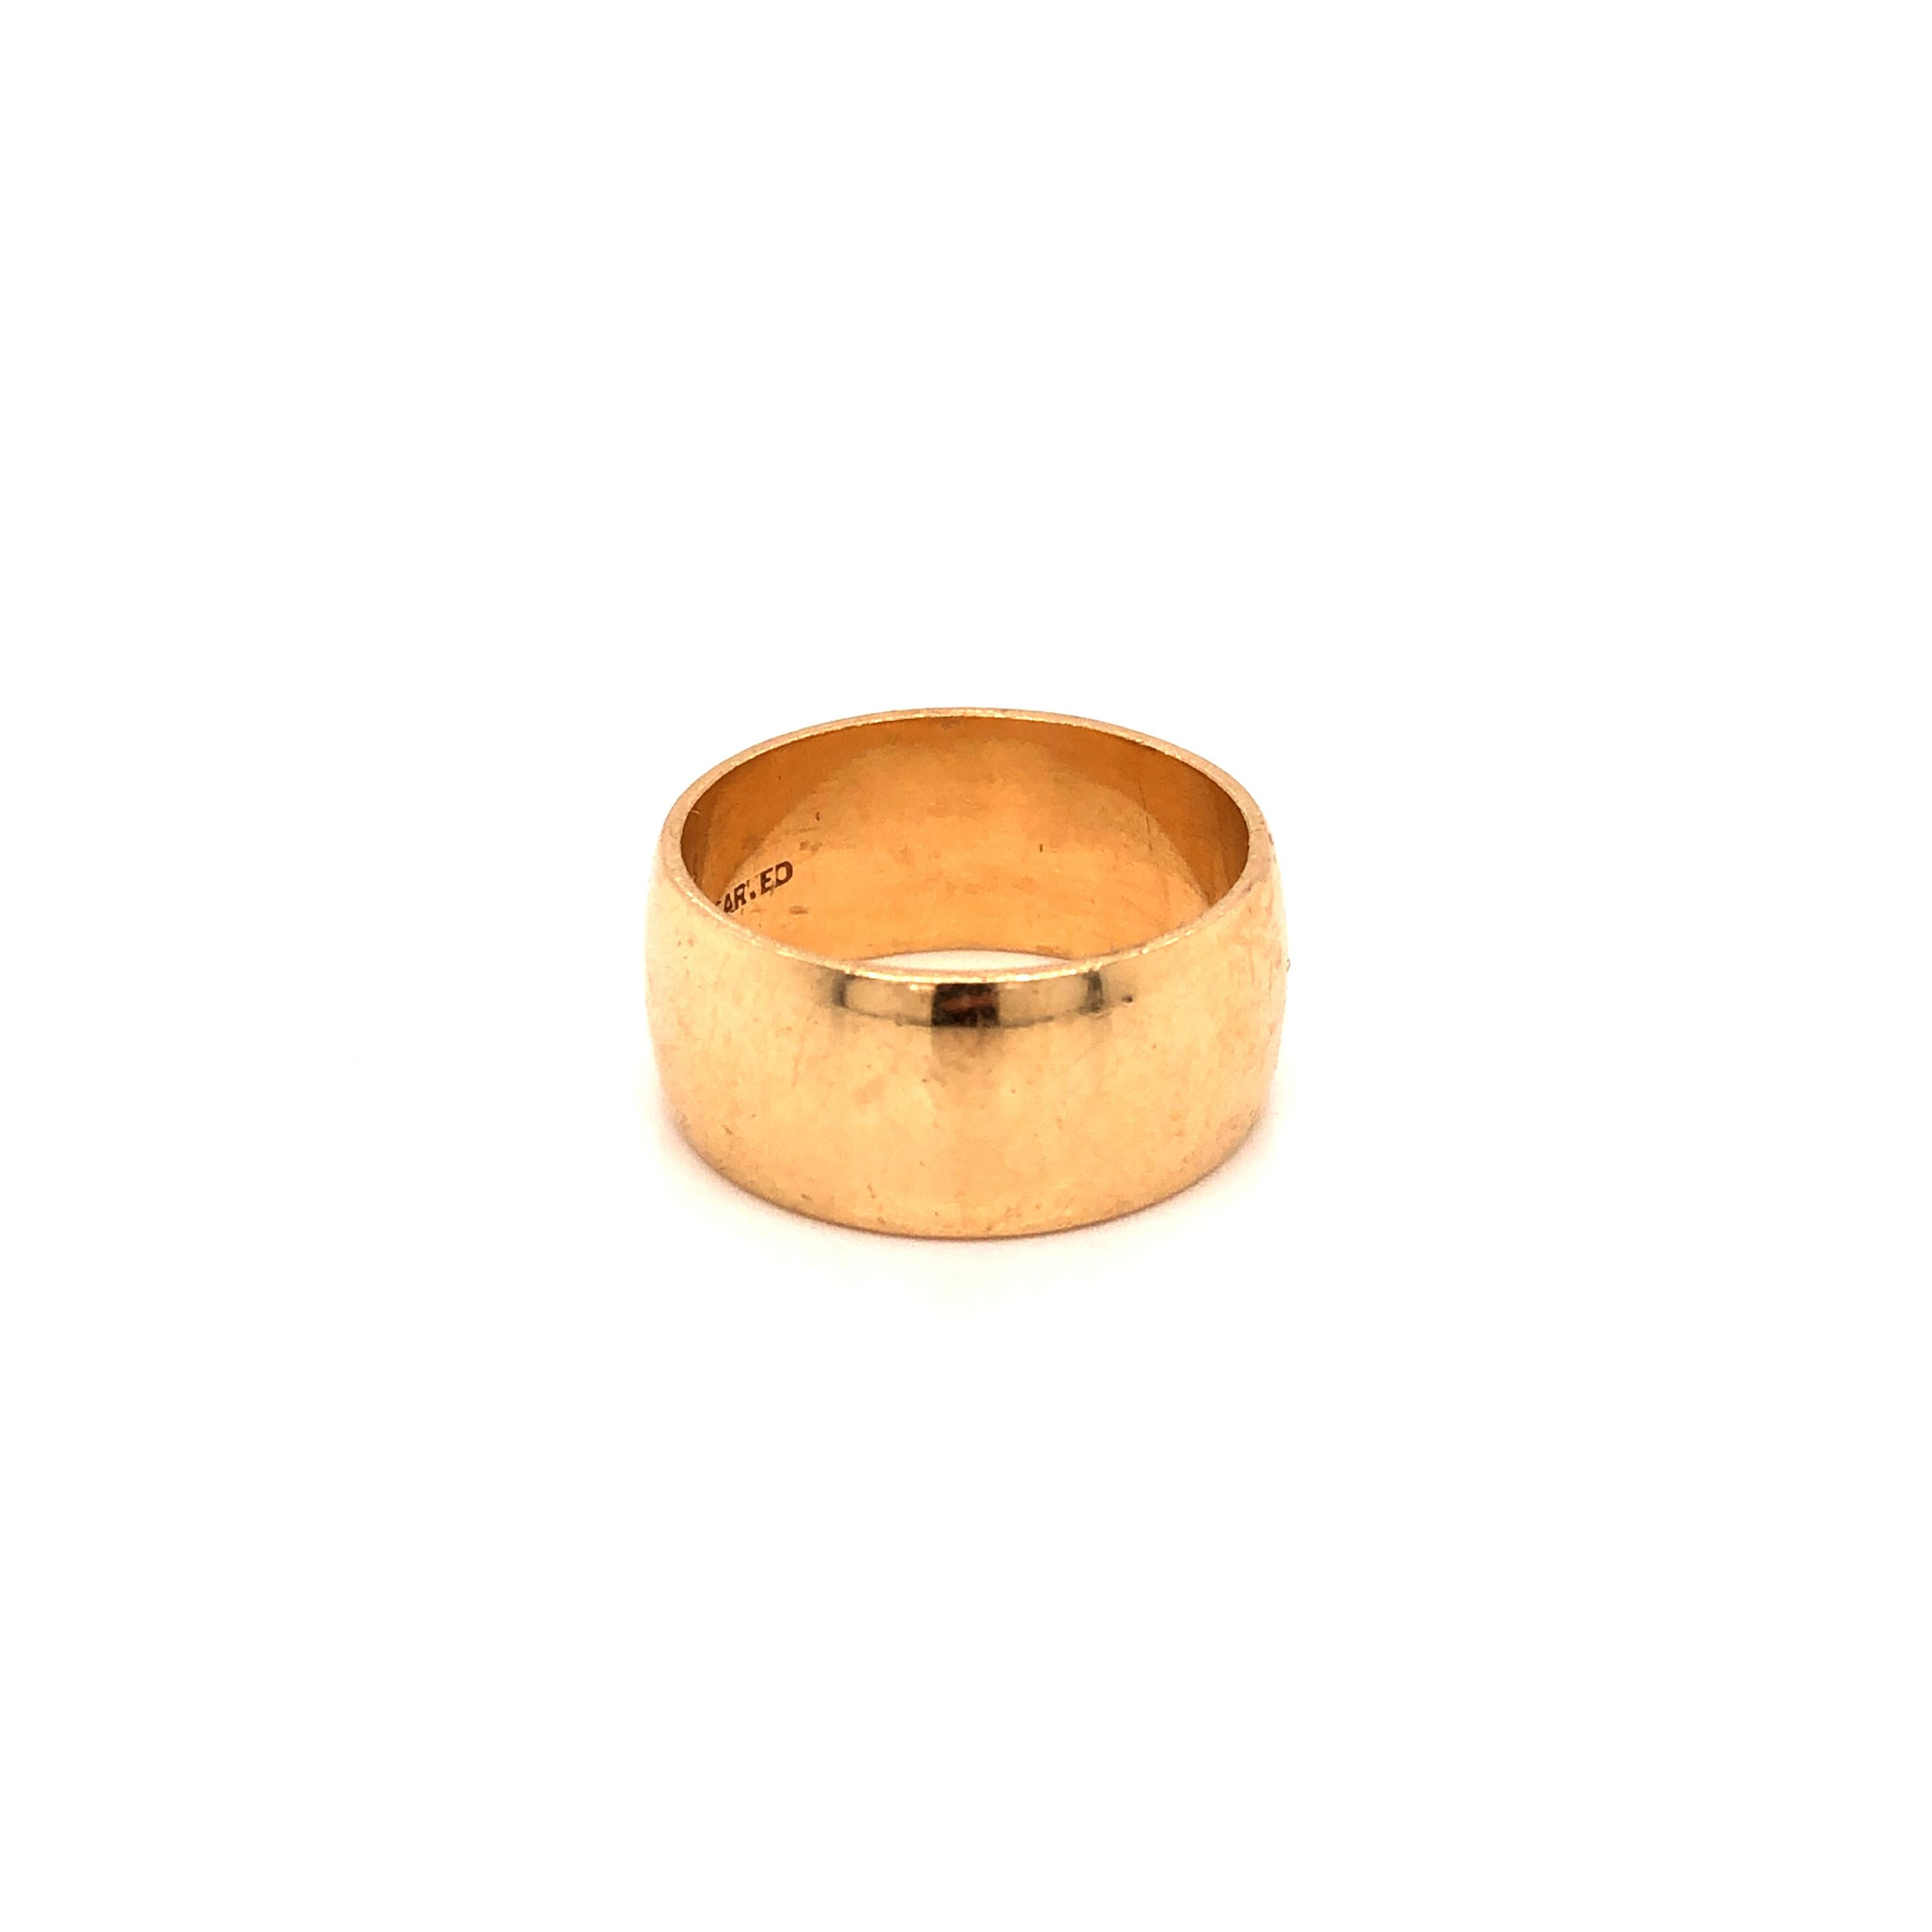 Vintage 14K Yellow Gold Band Ring. The height of the ring measures 9.60 mm

Ring Size 8.25. 

Weight: 10 grams